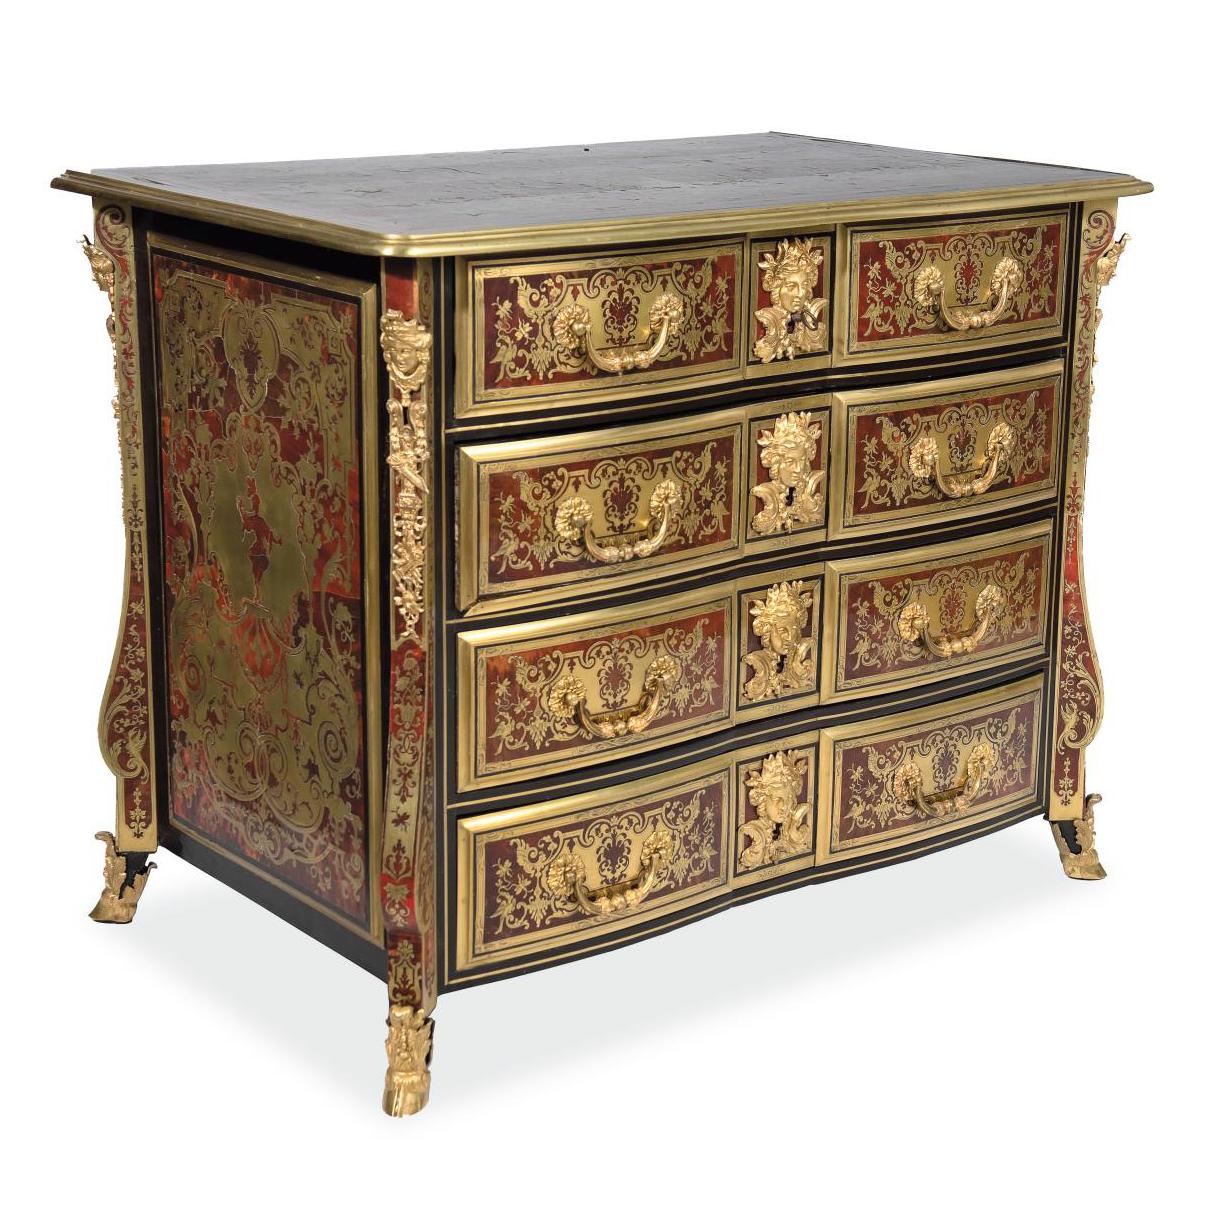 Nicolas Sageot: The Use of Tortoiseshell in the Age of Louis XIV - Lots sold